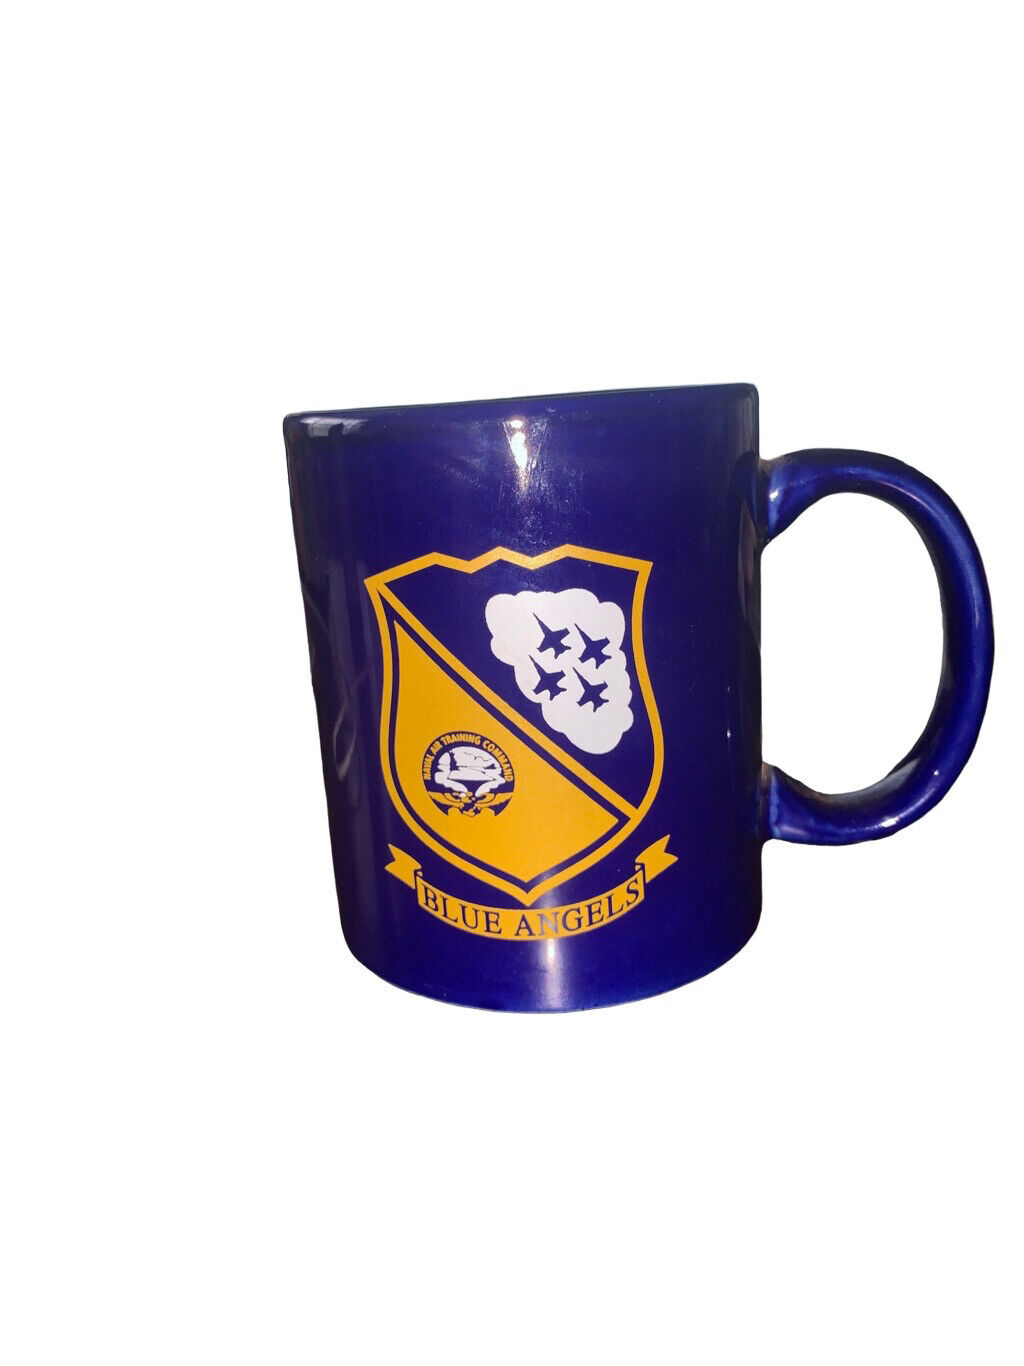 Pre Owned Vintage BLUE ANGELS Coffee Mug Blue Gold Crest Naval Air Training Comm